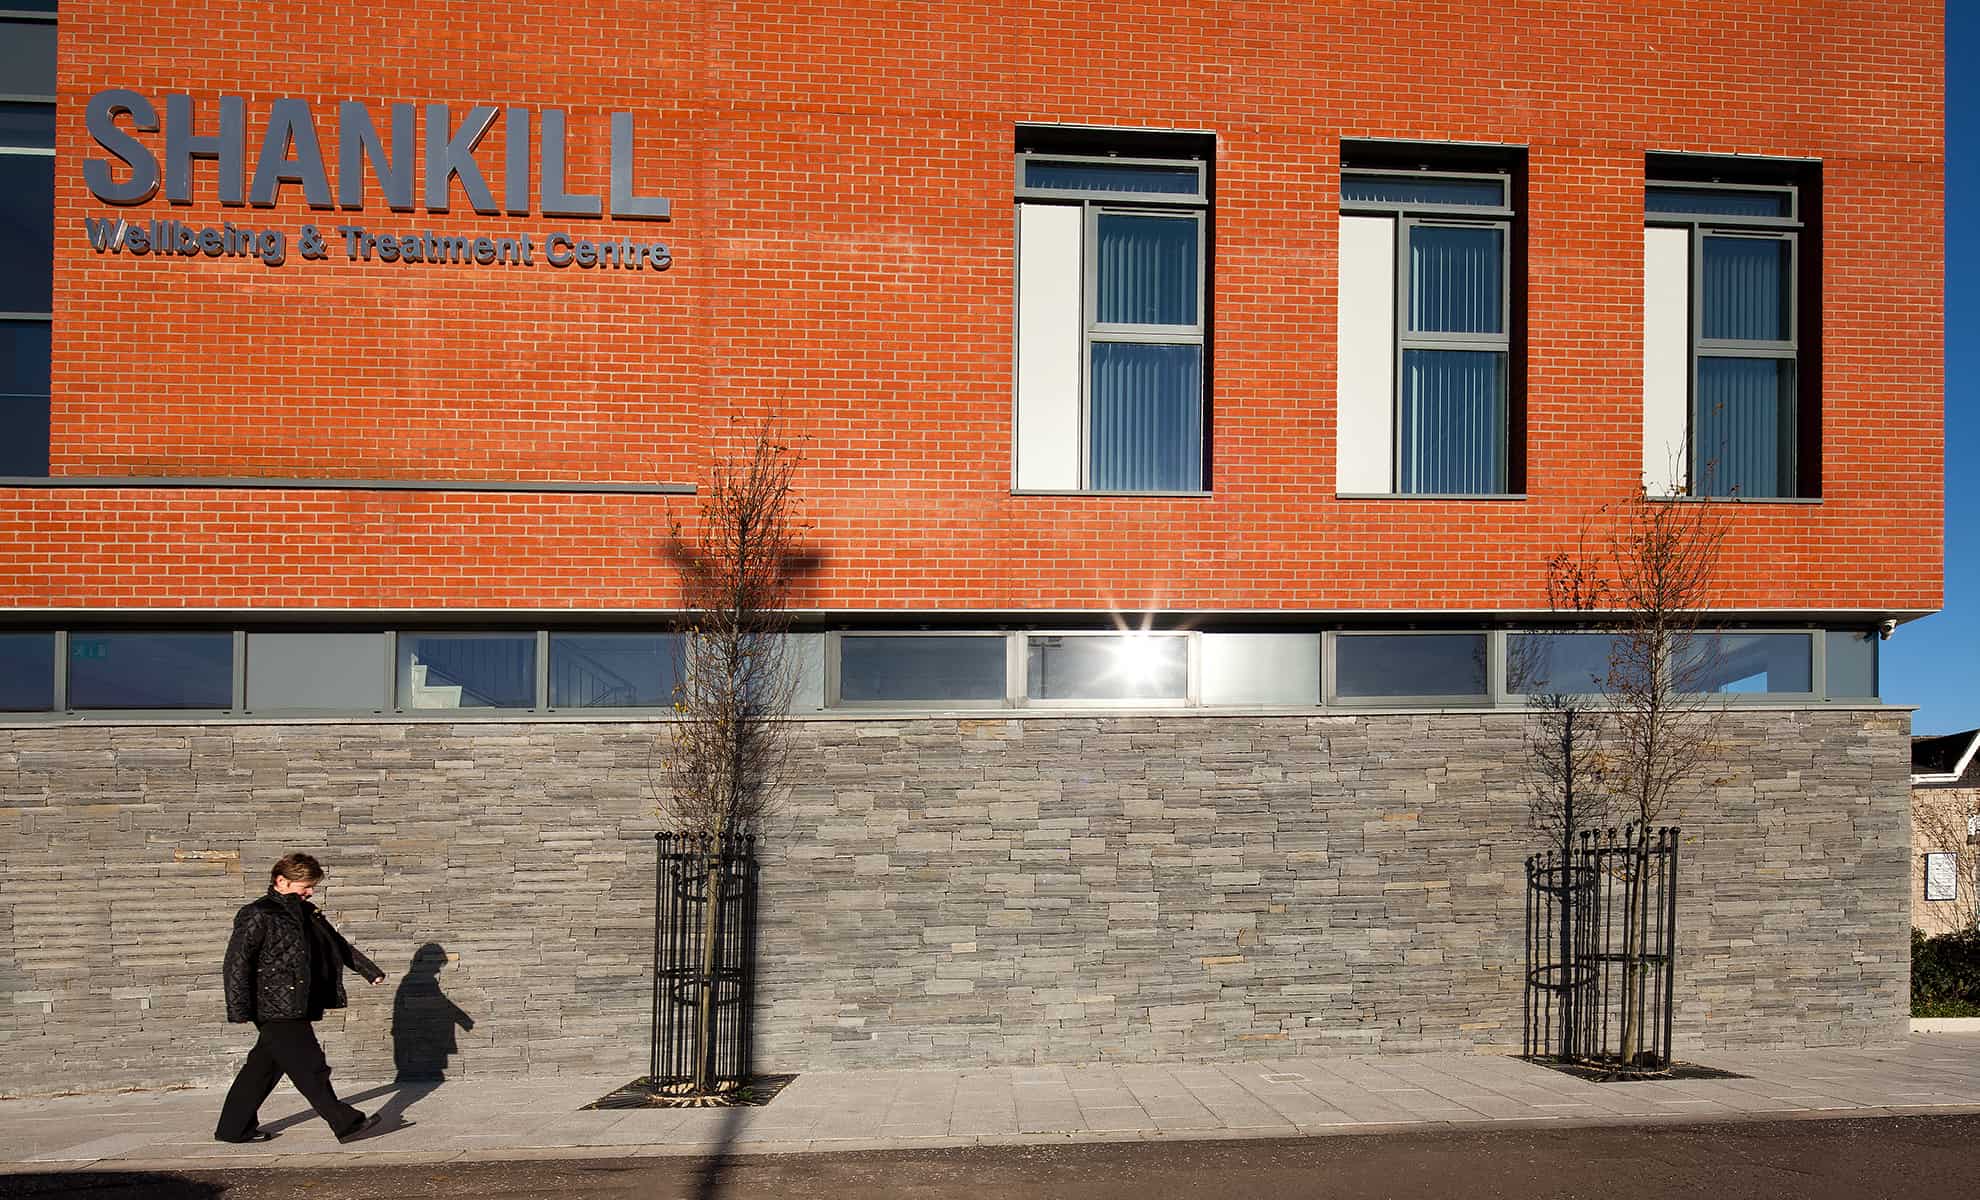 Shankill Wellbeing and Treatment Centre, Belfast